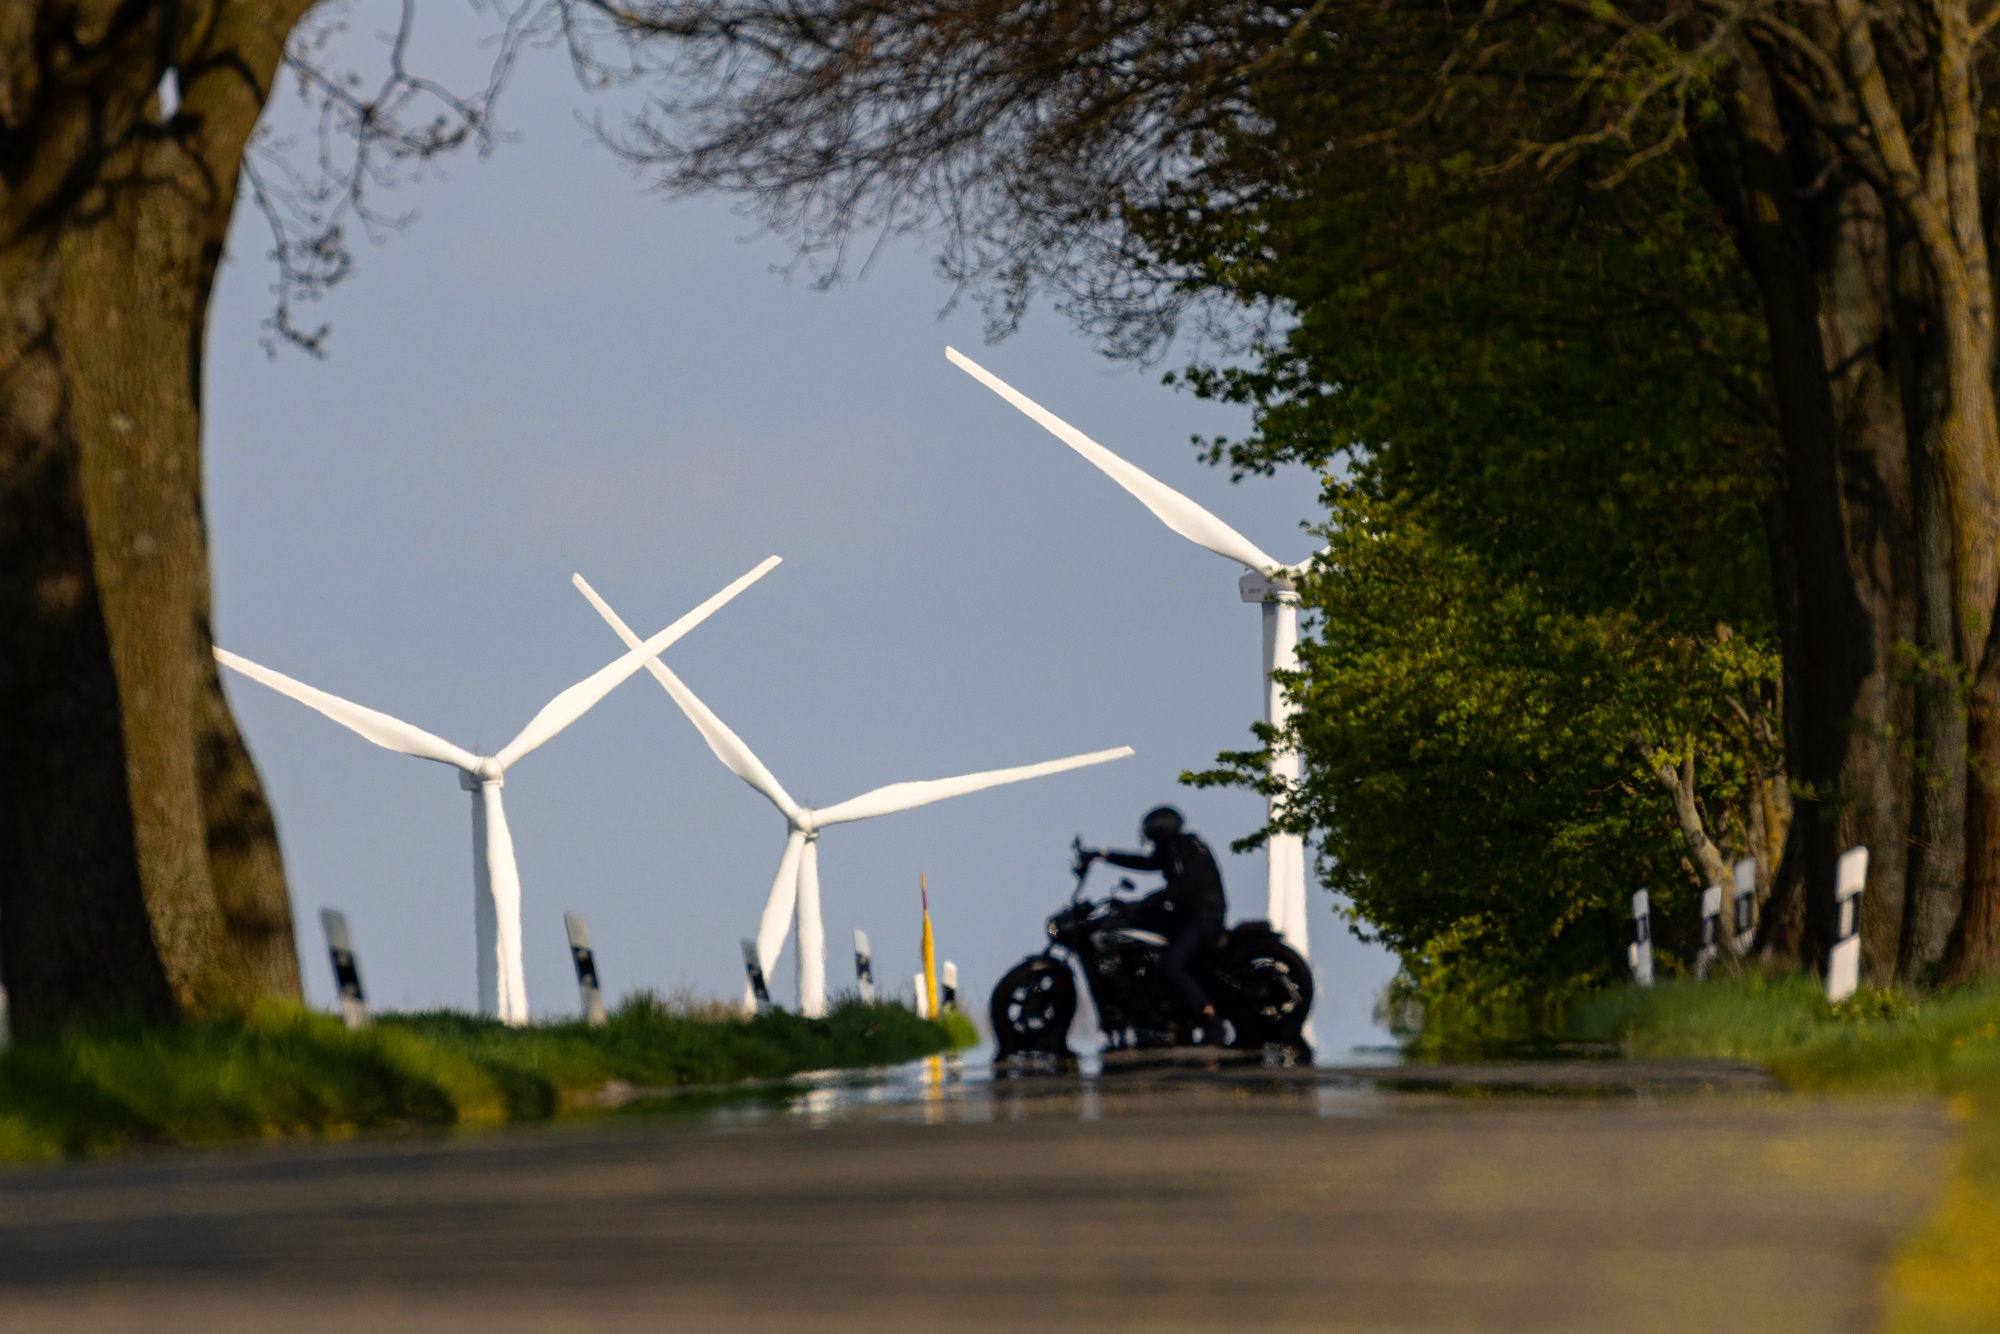 Germany's Energy Crisis at Risk of Getting Worse With Lack of Wind